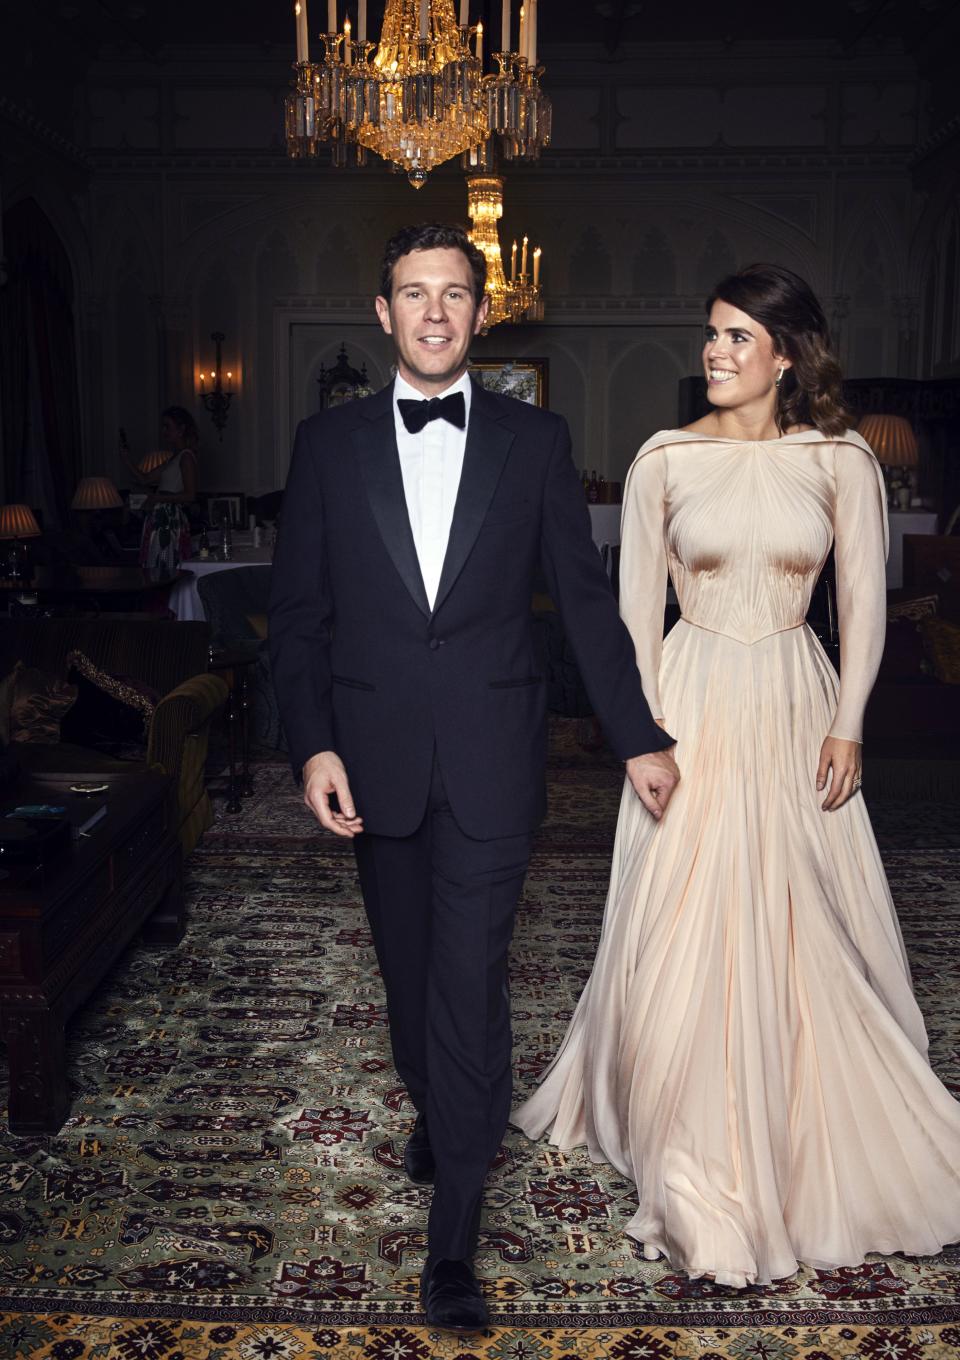 See Princess Eugenie's Reception Dress From Every Angle in New Photos